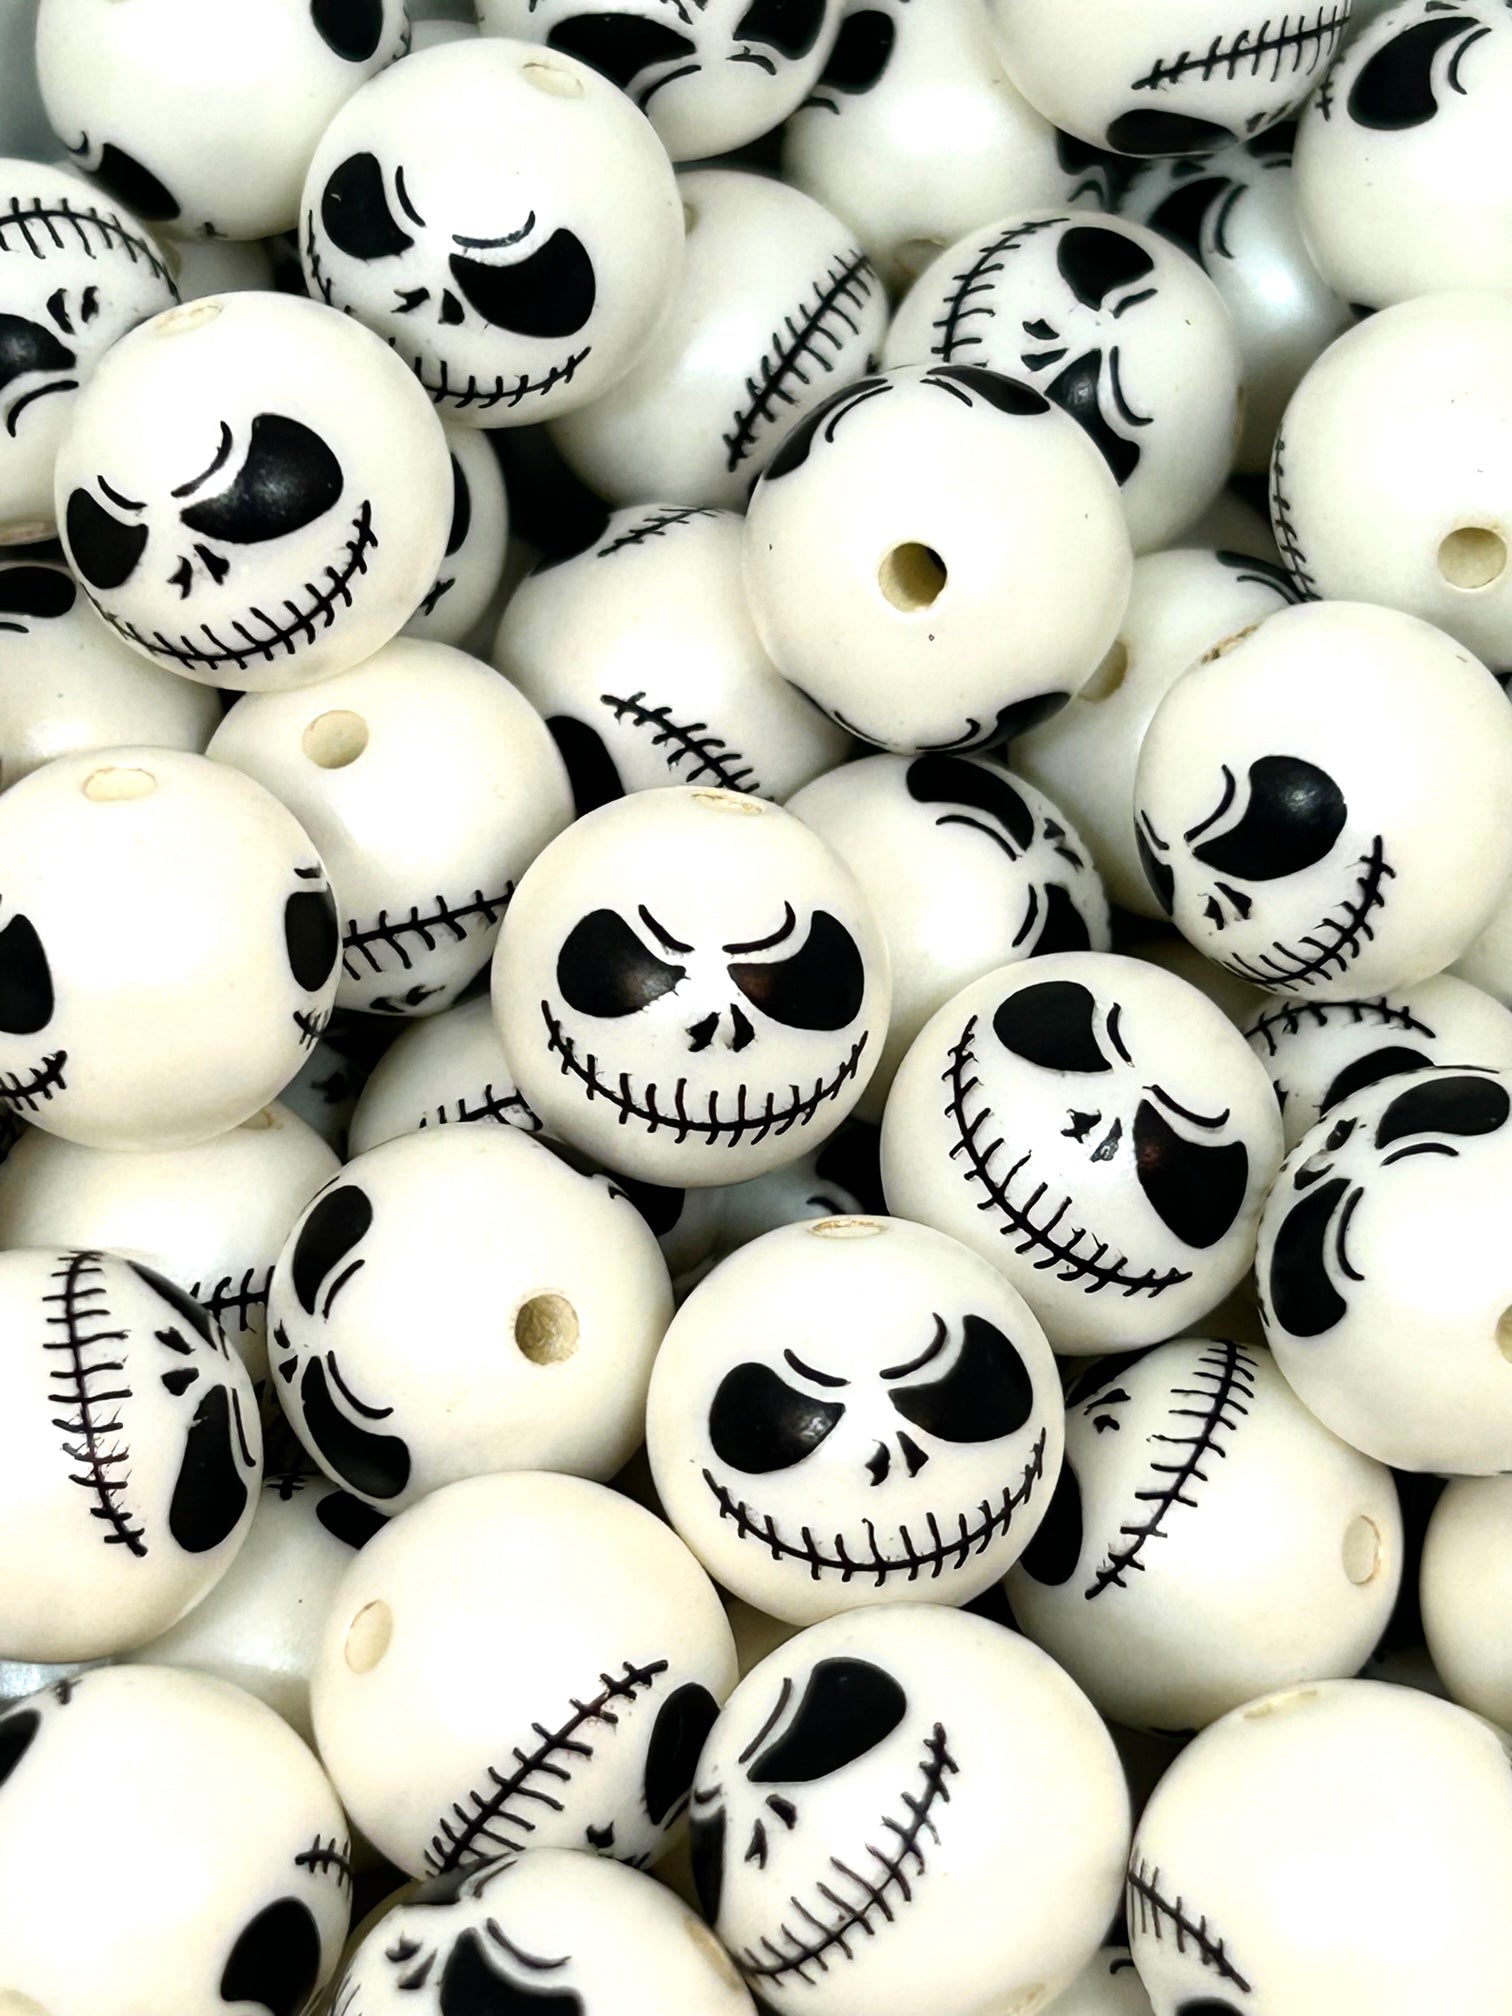 Creepy Cute: Jack the Skeleton Beads for Spooktacular Jewelry!